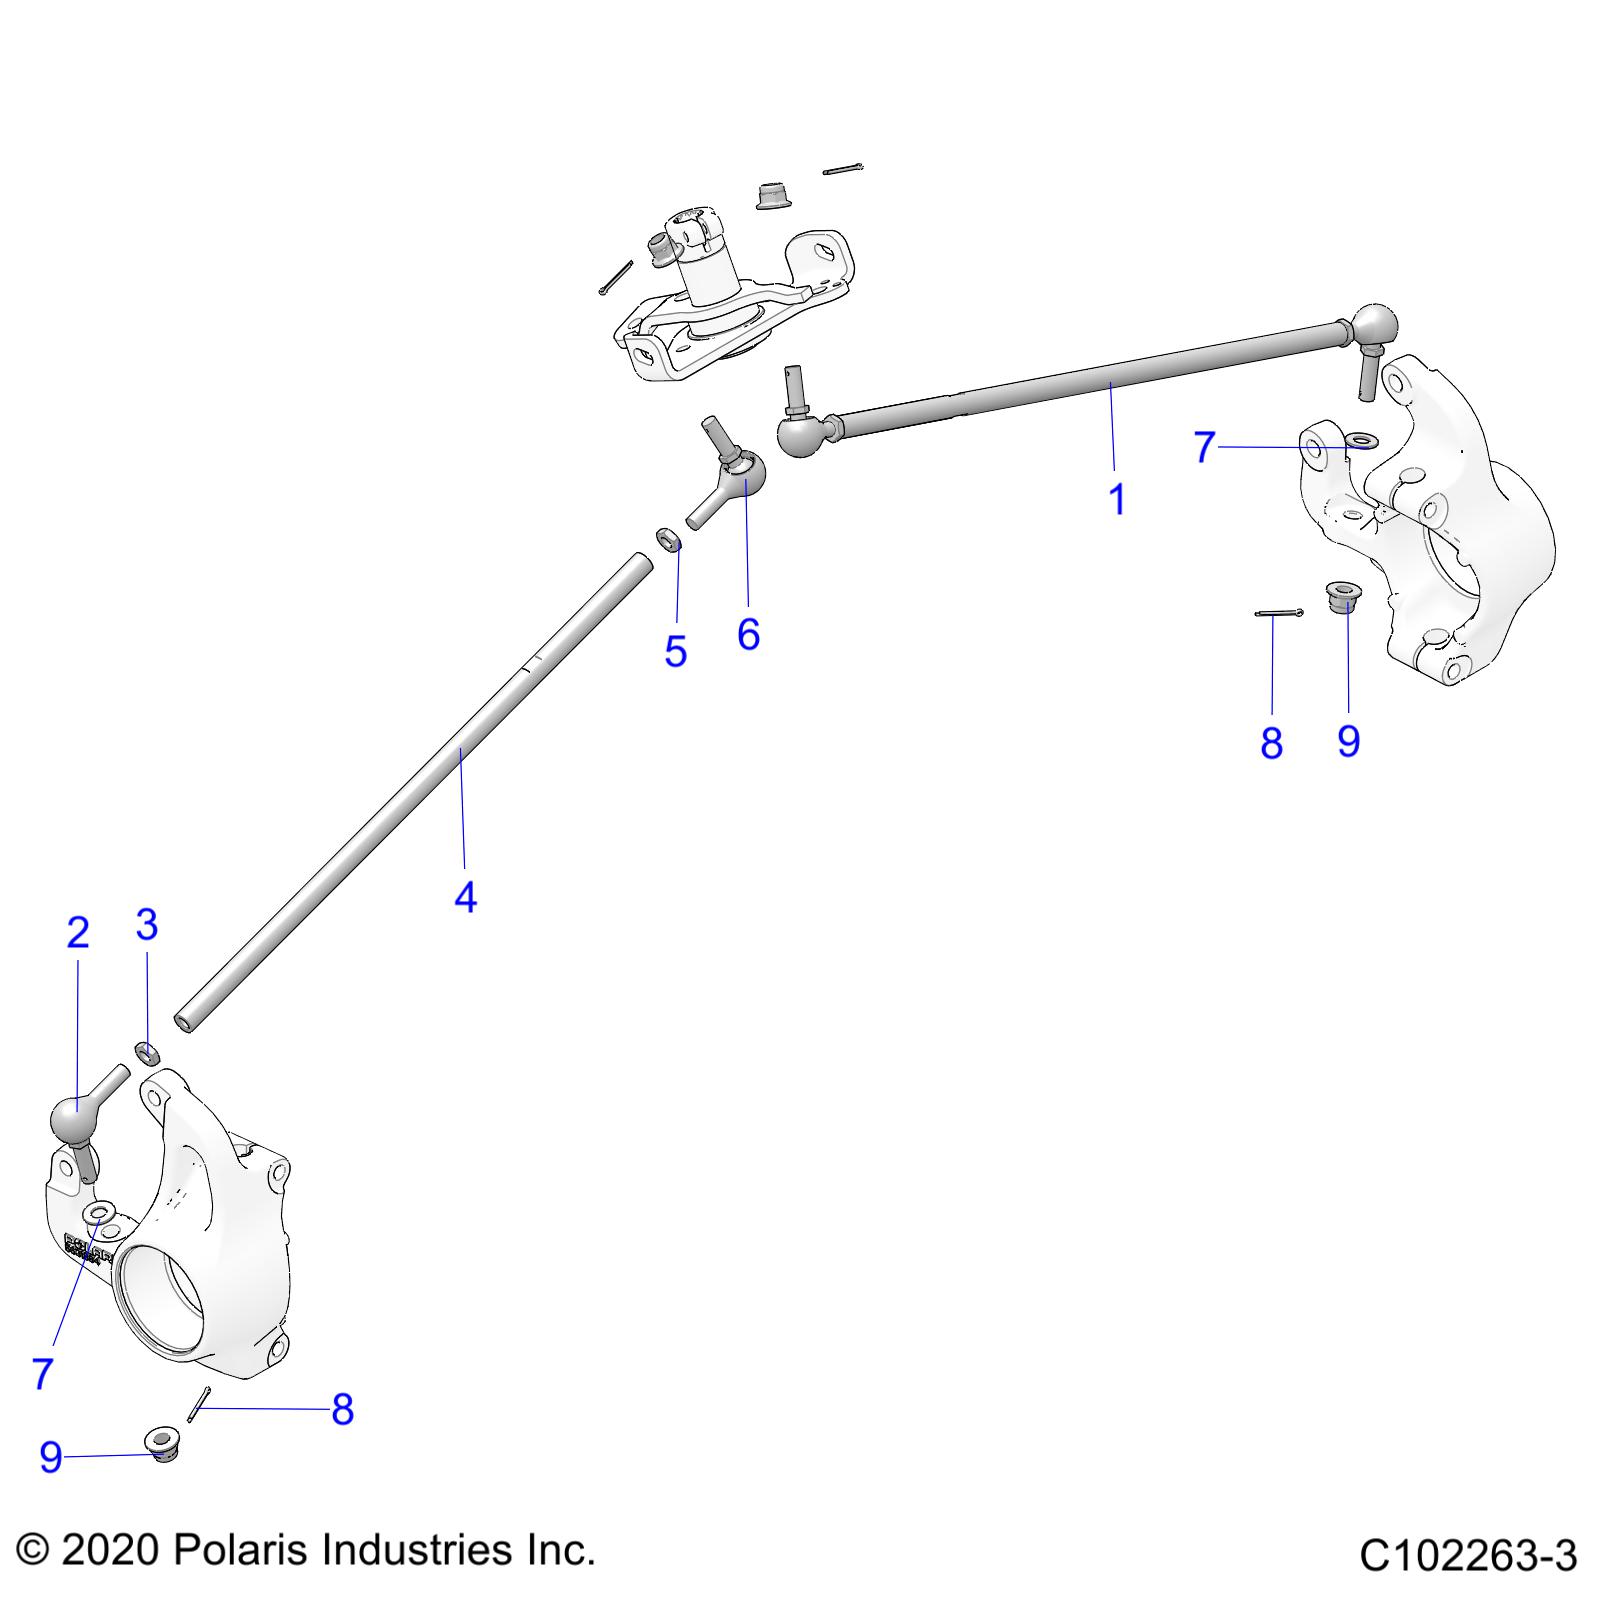 Part Number : 1824007 TIE ROD ASSEMBLY